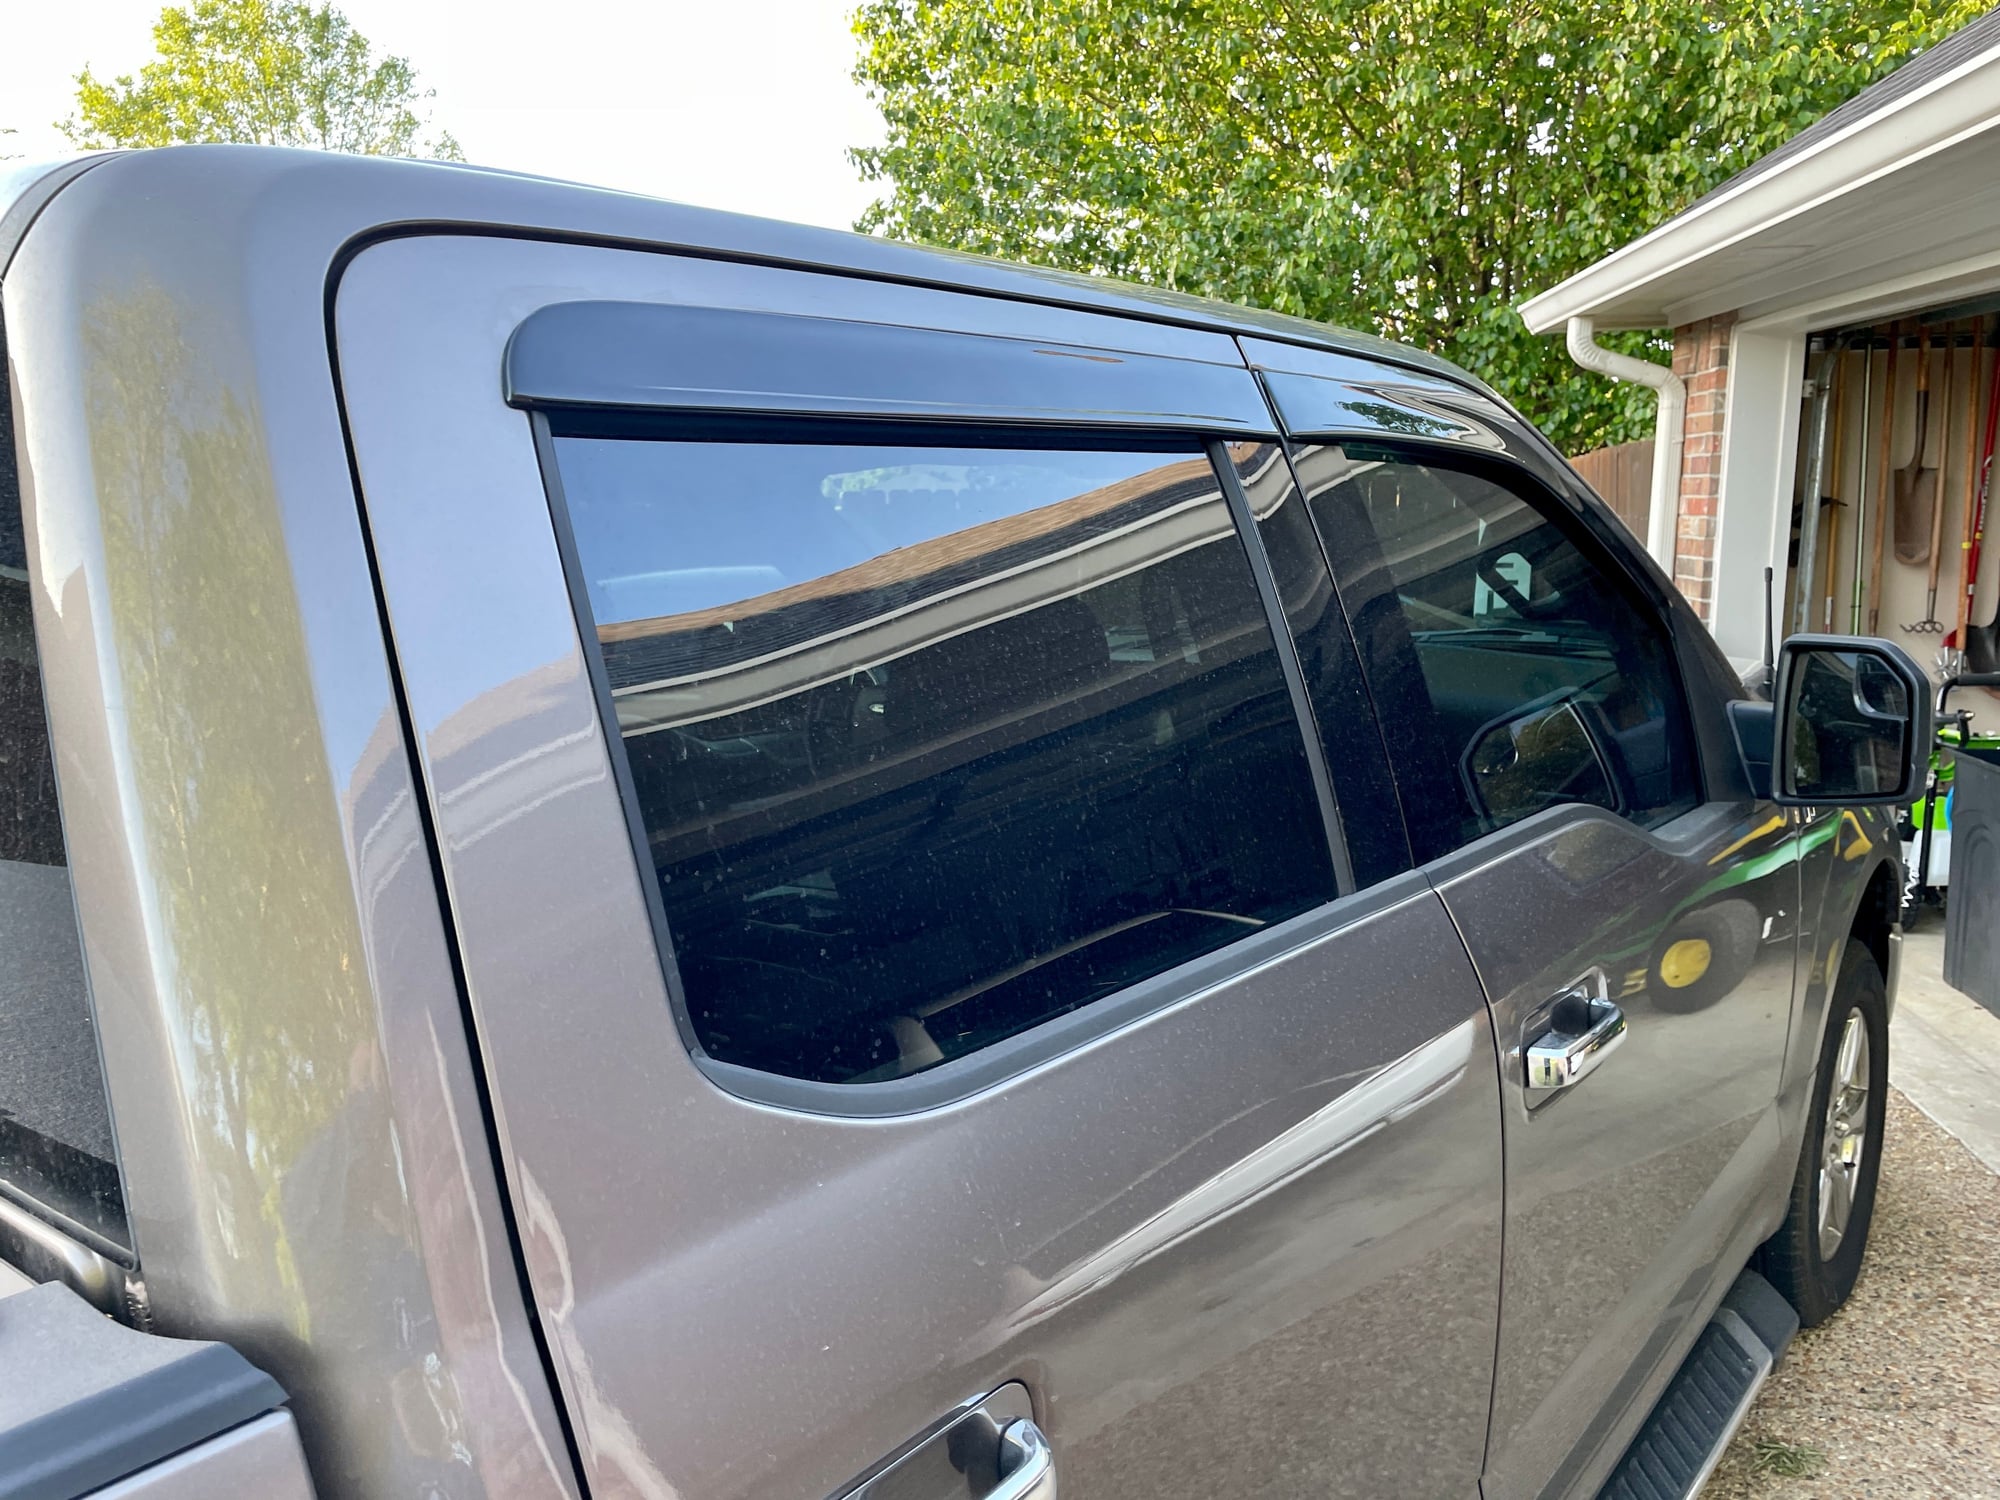 Window visors / deflector? - Page 6 - Ford F150 Forum - Community of ...